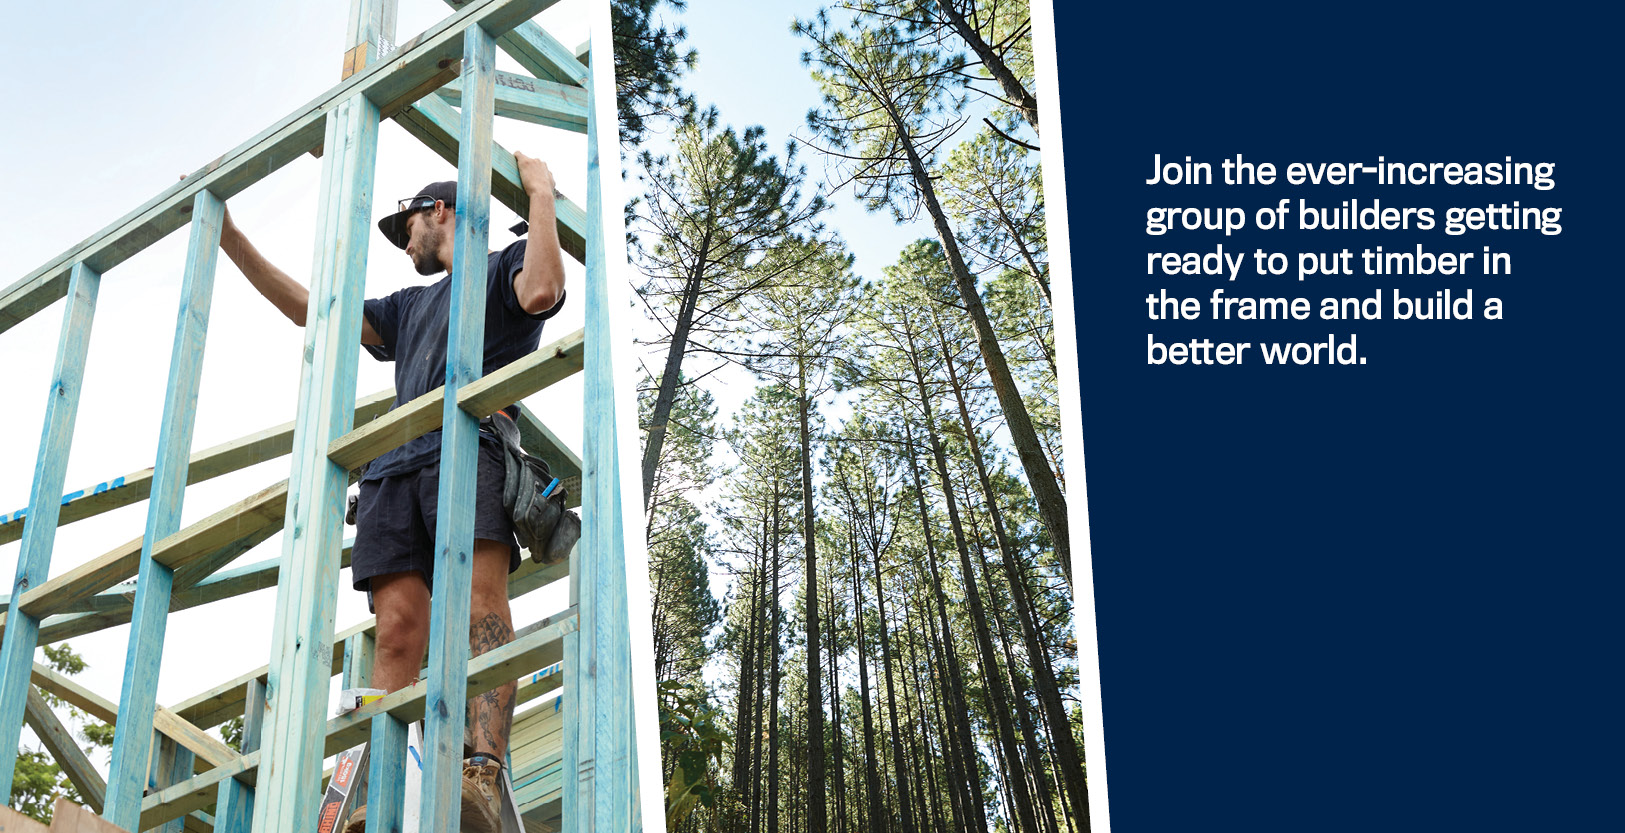 Join the ever-increasing group of builders getting ready to put timber in the frame and build a better world.